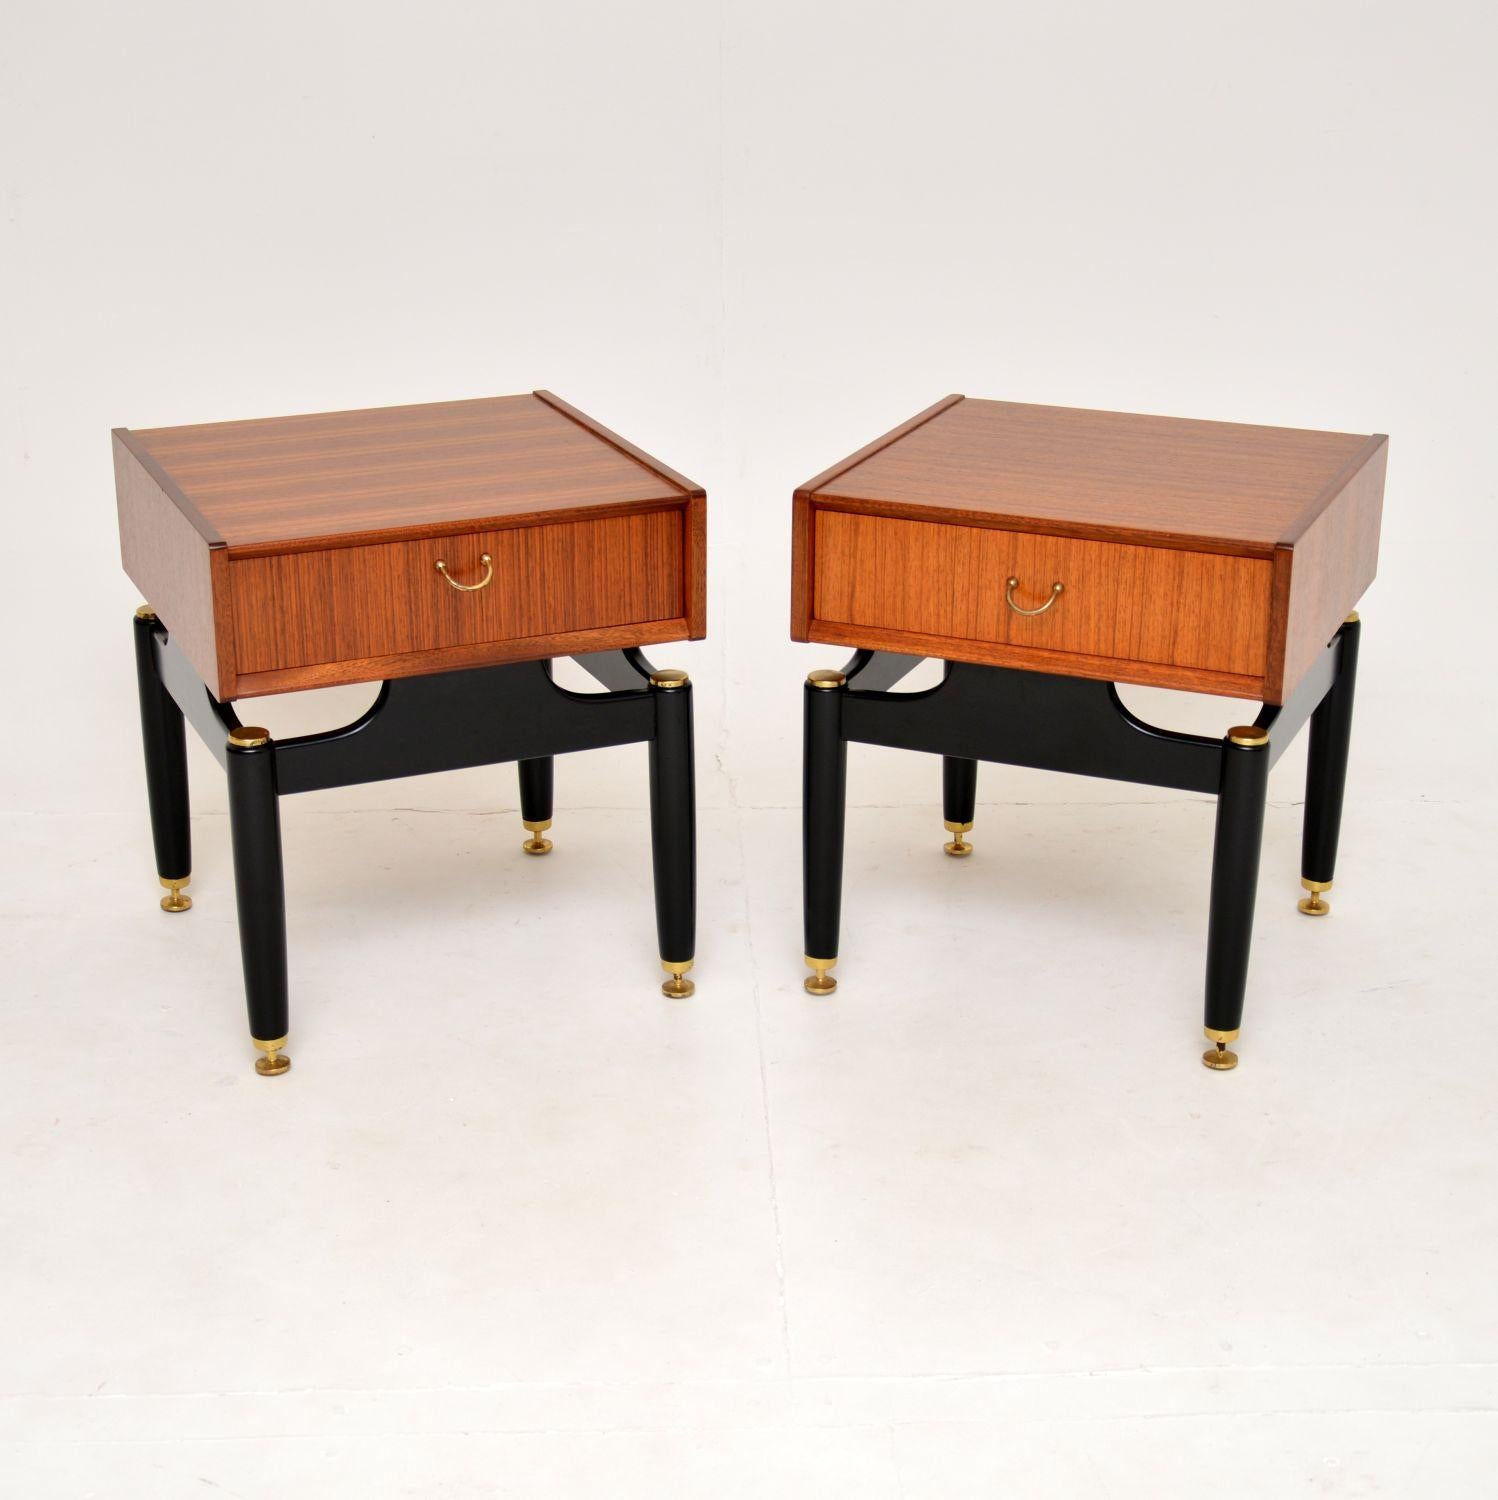 A fantastic pair of vintage side tables in tola wood, they were made by G Plan and date from the 1950-60’s.

They are a useful size, perfect for use as bedside tables or as lamp tables in a lounge setting. Each has a single drawer, and sits on